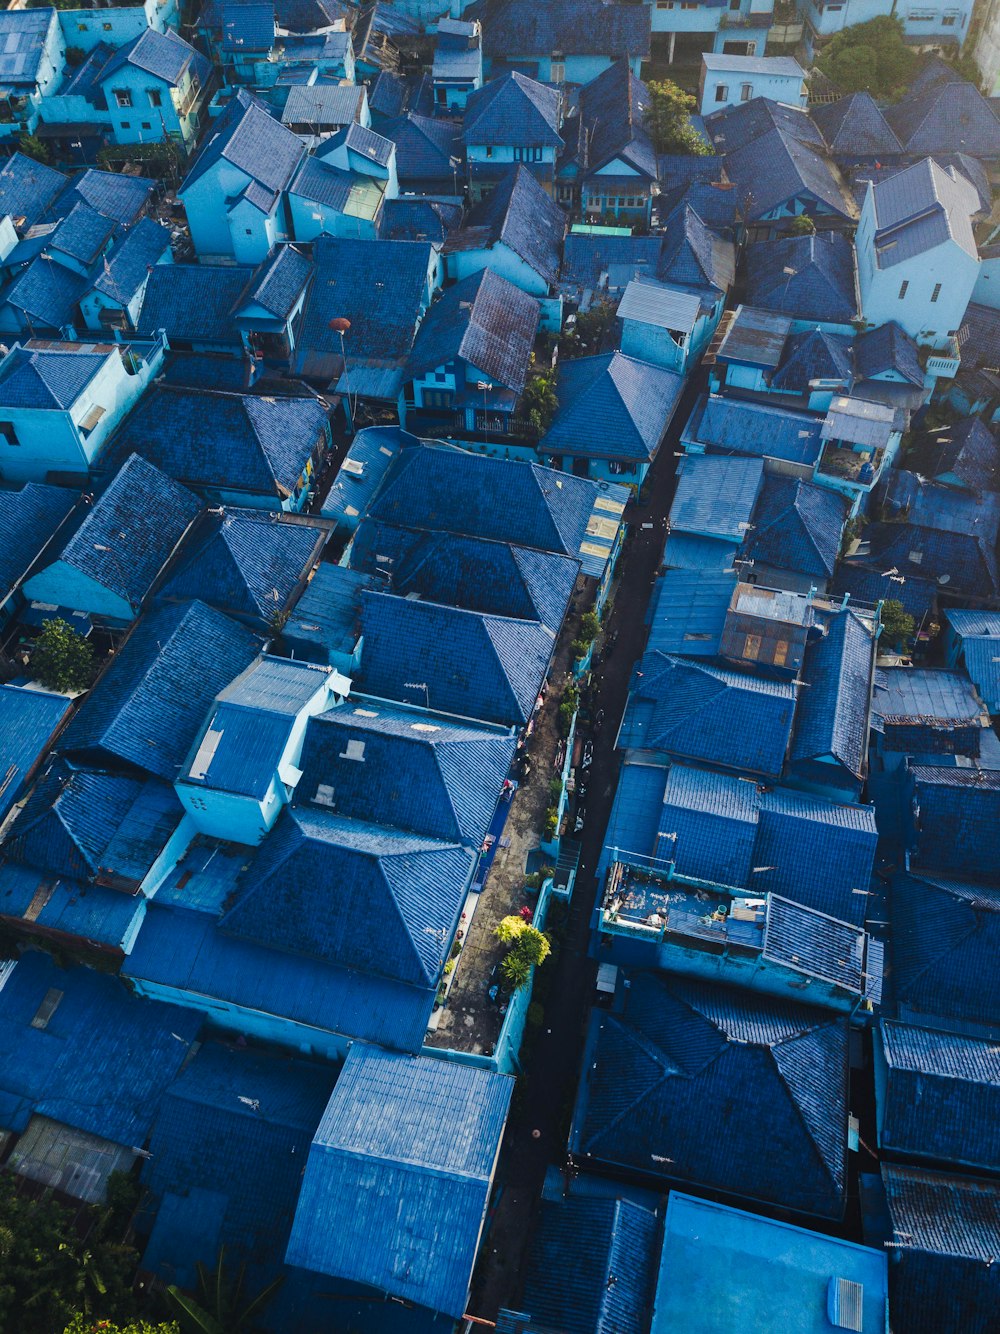 blue roofed houses at subdivision